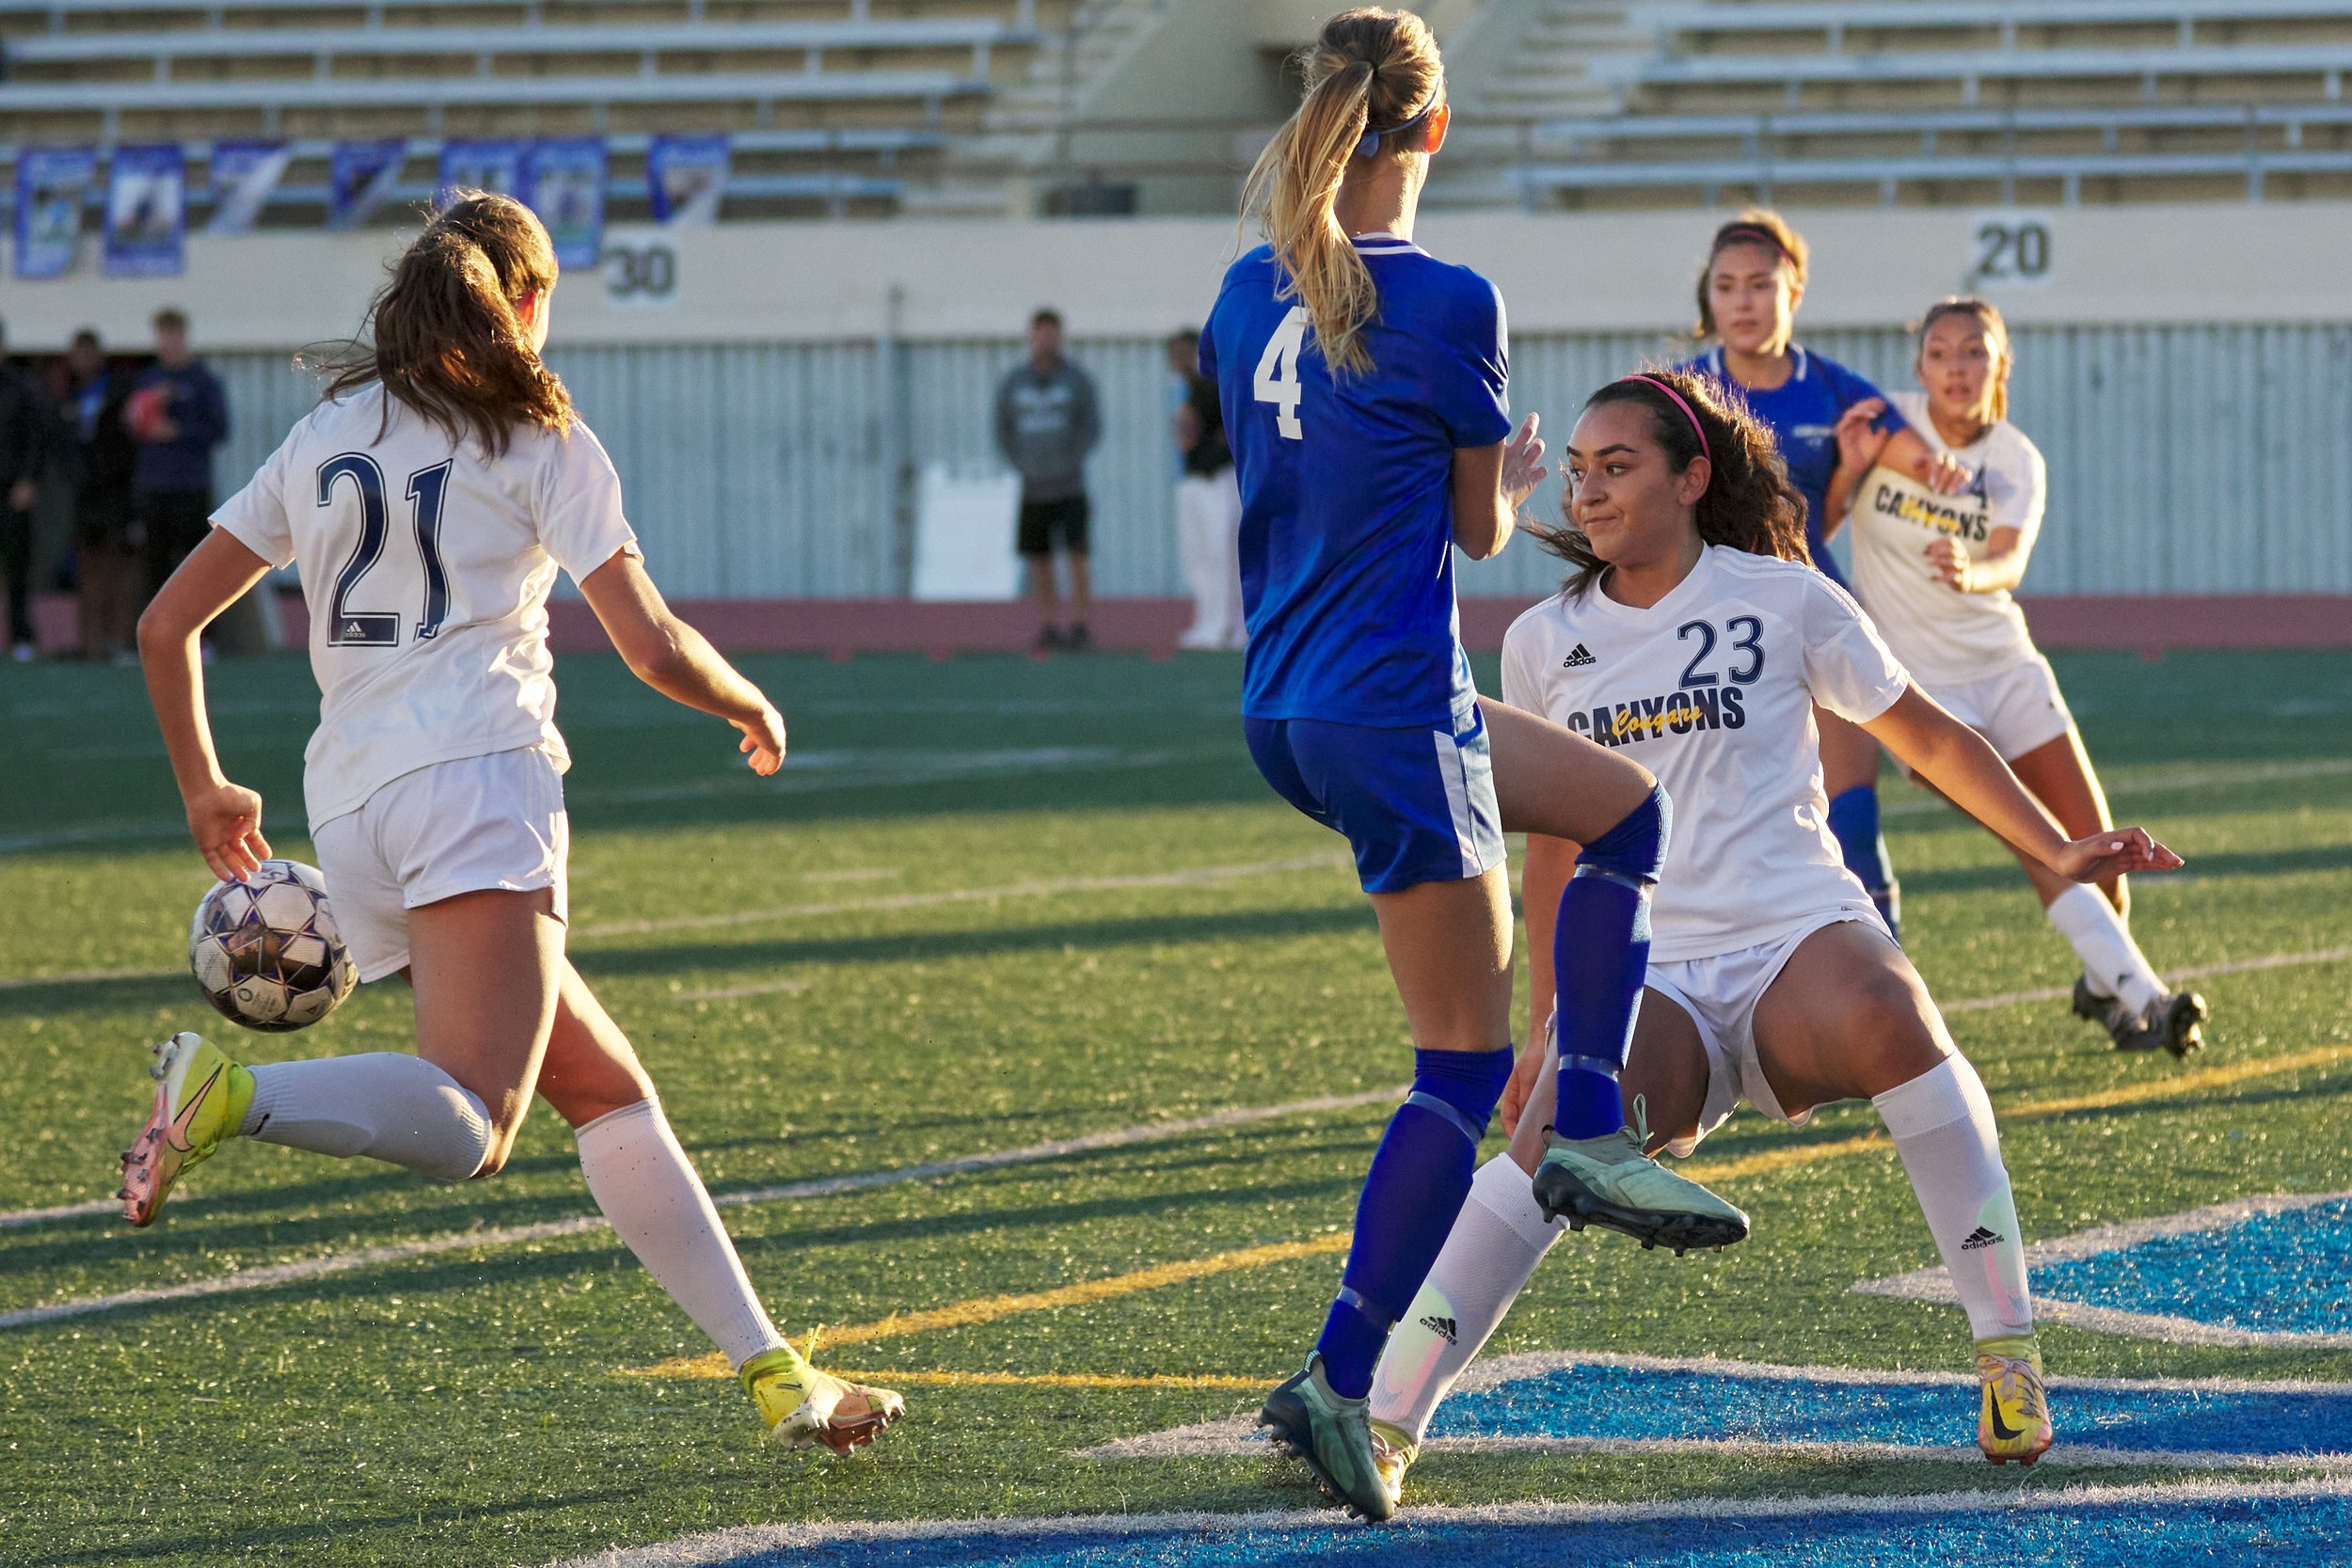  College of the Canyons Natalie Quezada (right) kicks the ball away from Santa Monica College Corsairs' Emma Rierstam (center) during the women's soccer match on Thursday, Nov. 10, 2022, at Corsair Field in Santa Monica, Calif. The Corsairs lost 3-0.